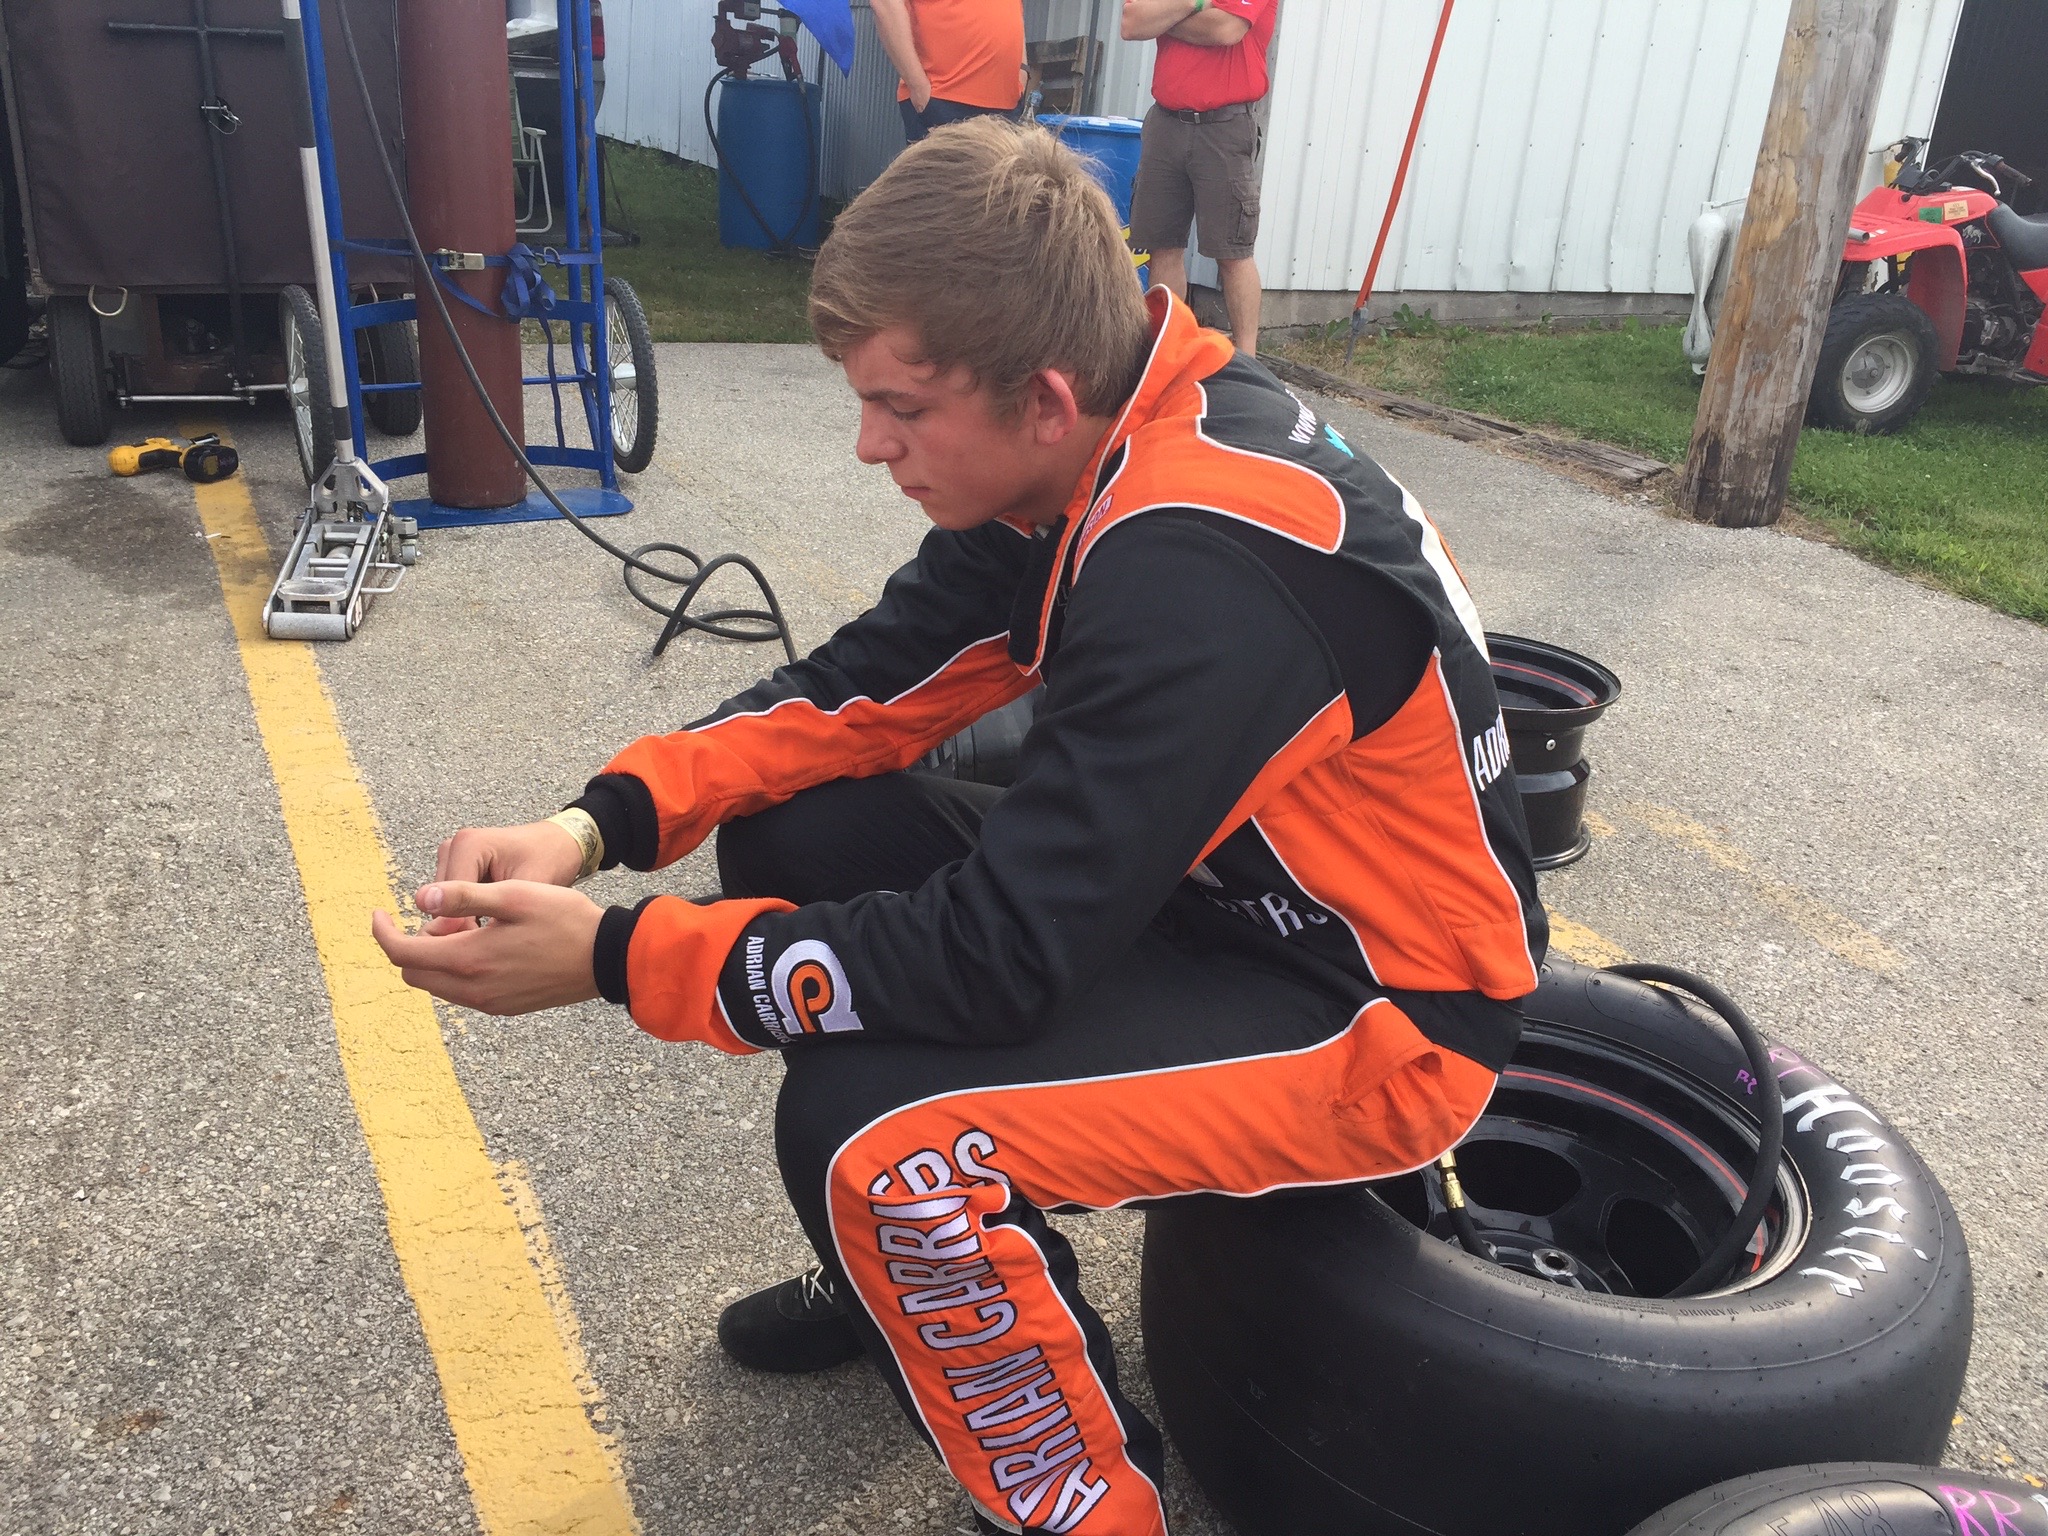 A Day In The Life Of A Race Car Driver In The Making